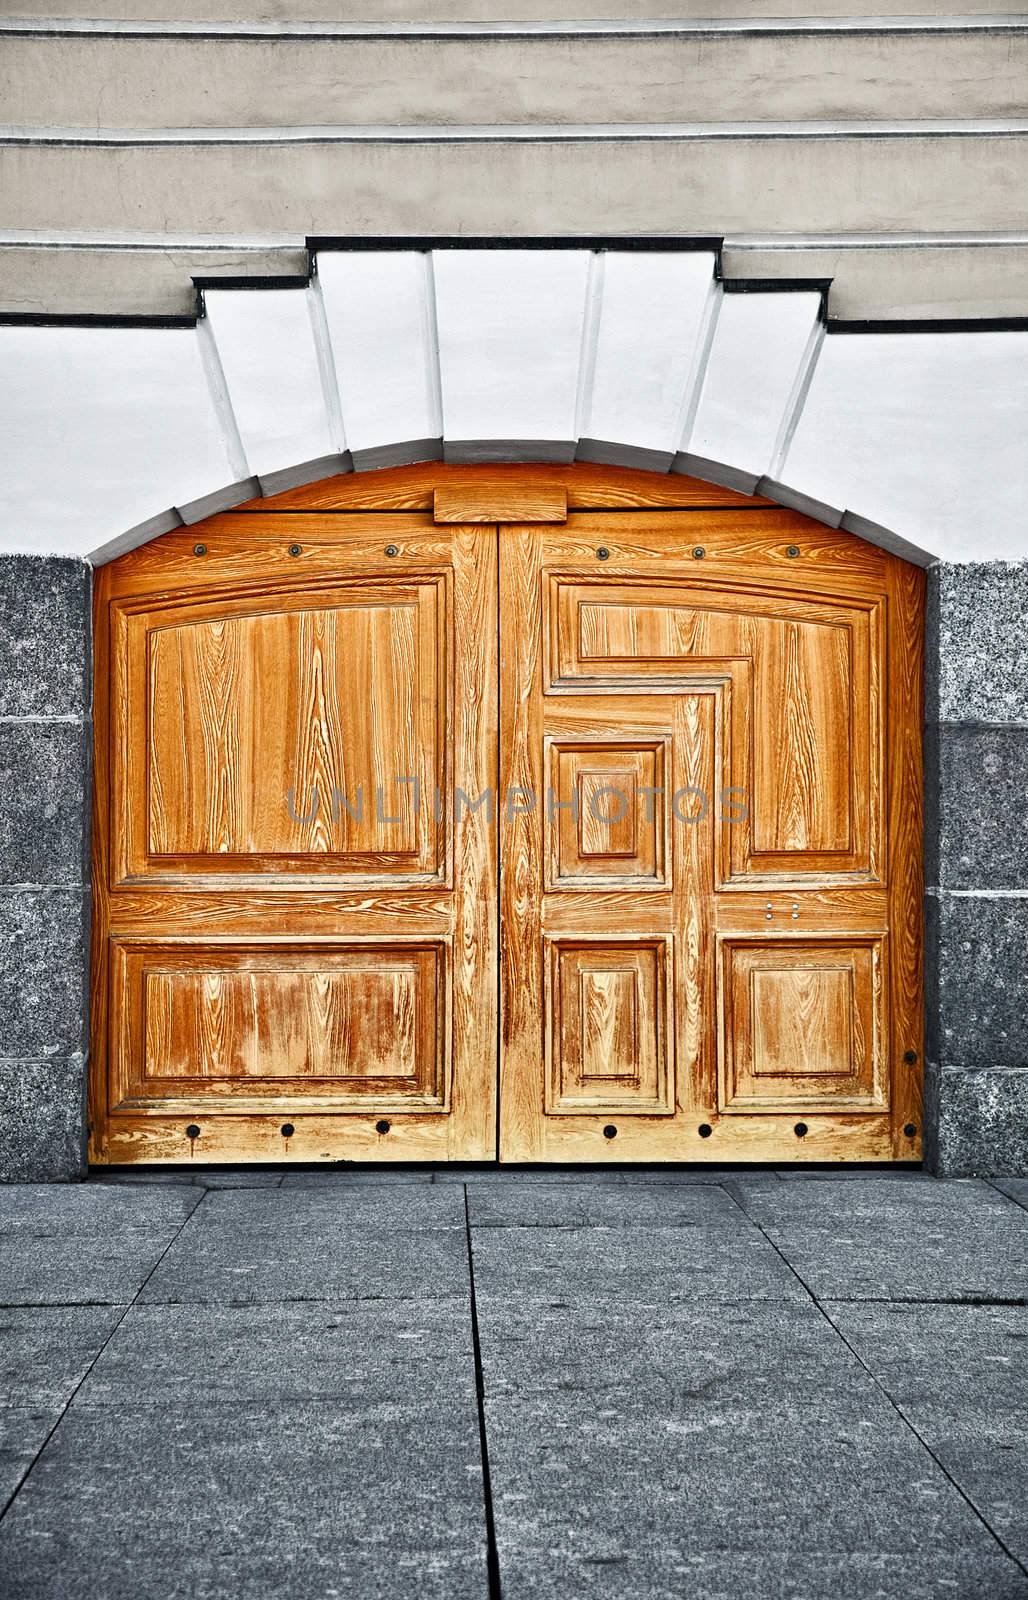 Large old wooden door - an architectural element